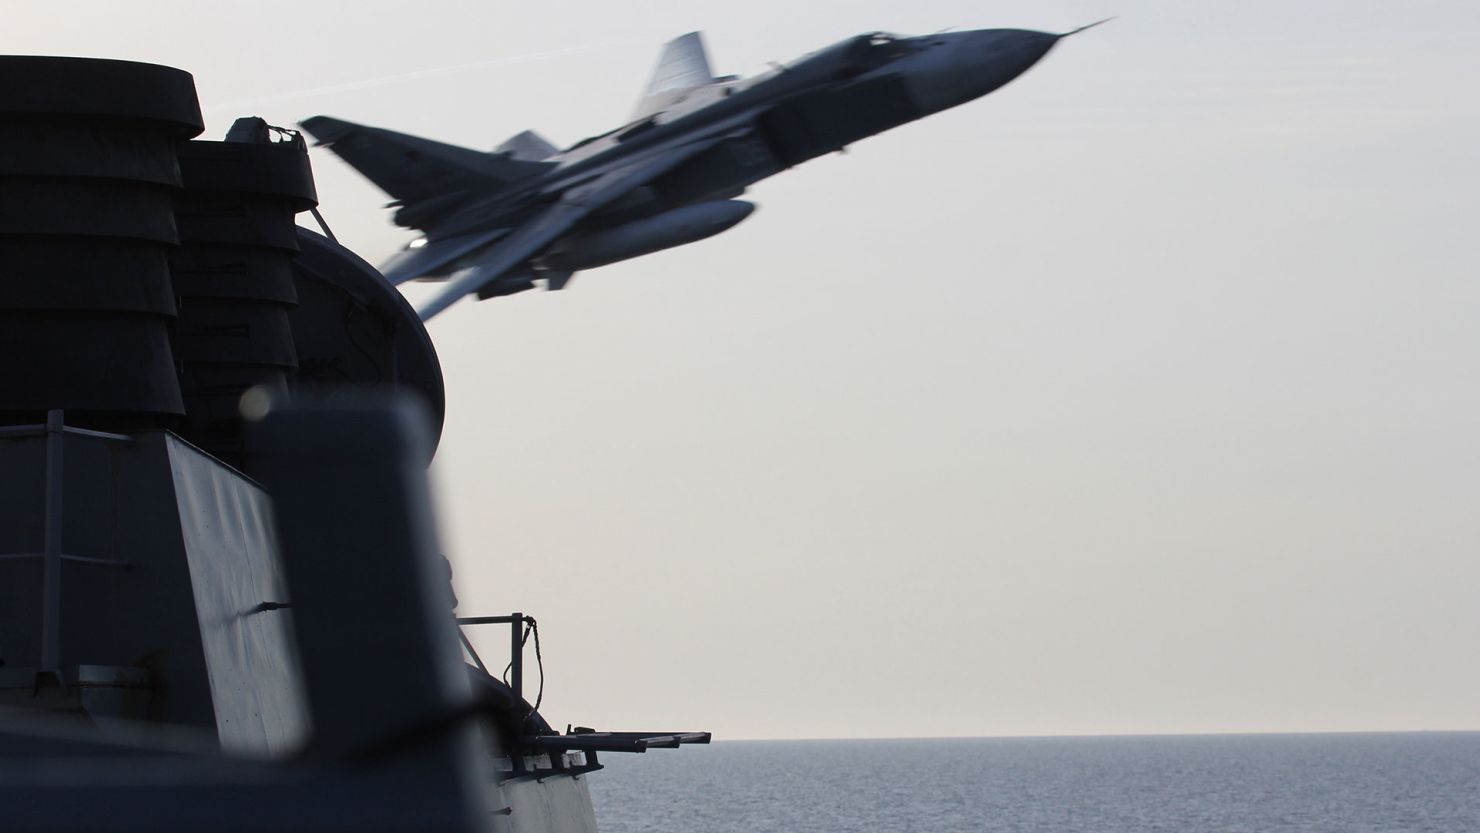 Unarmed Russian fighter jets made two extremely close overflights in April of the USS Donald Cook, sailing in the Baltic Sea.